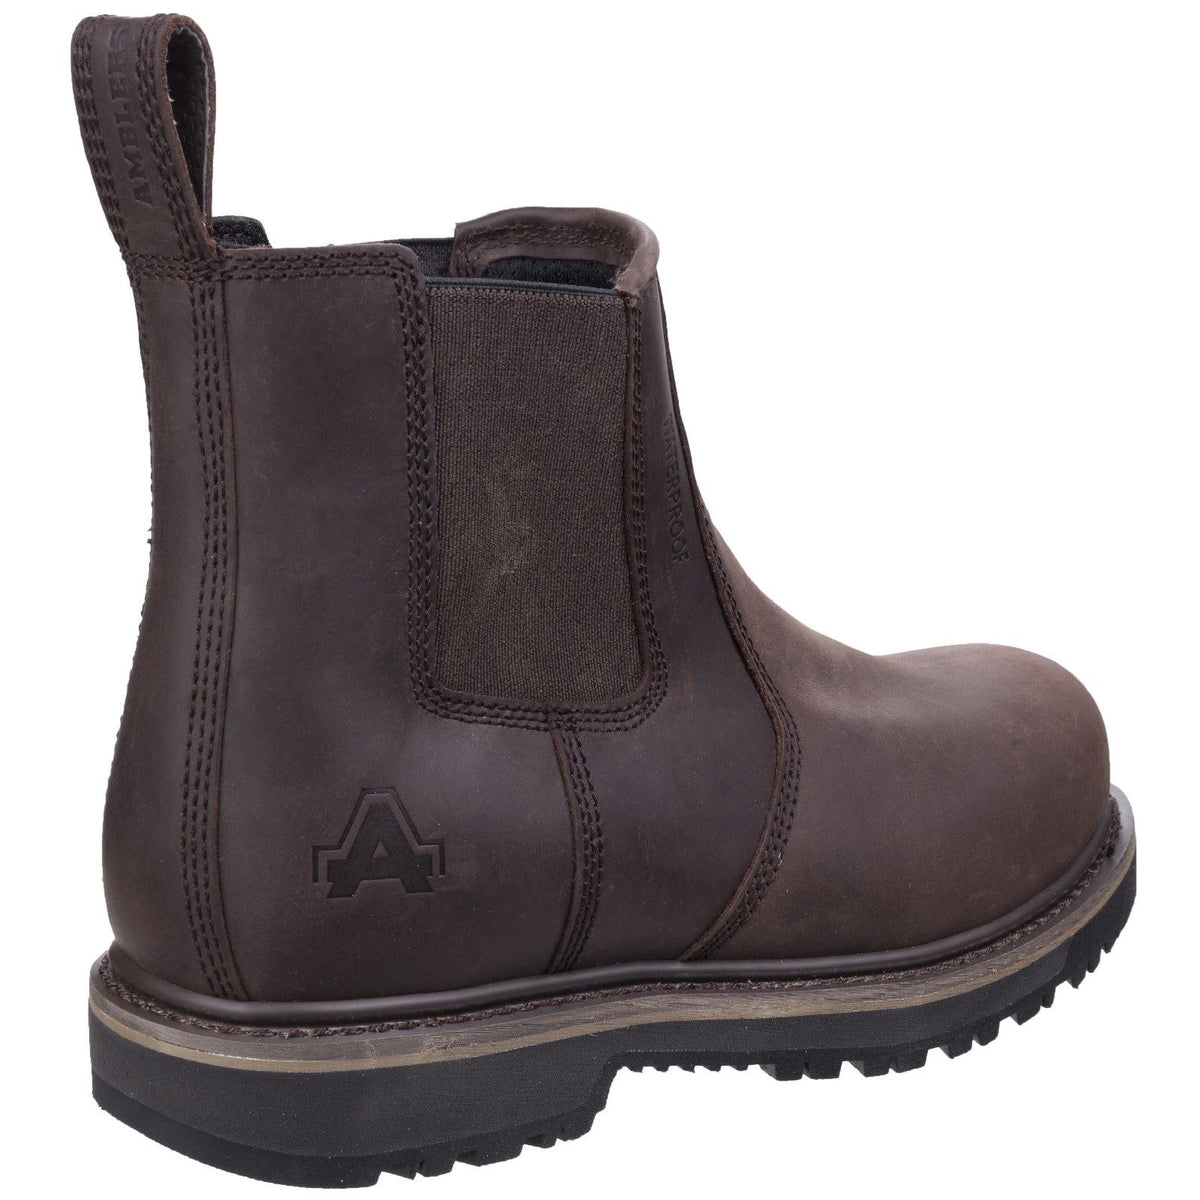 Amblers Safety AS231 Dealer Safety Boots